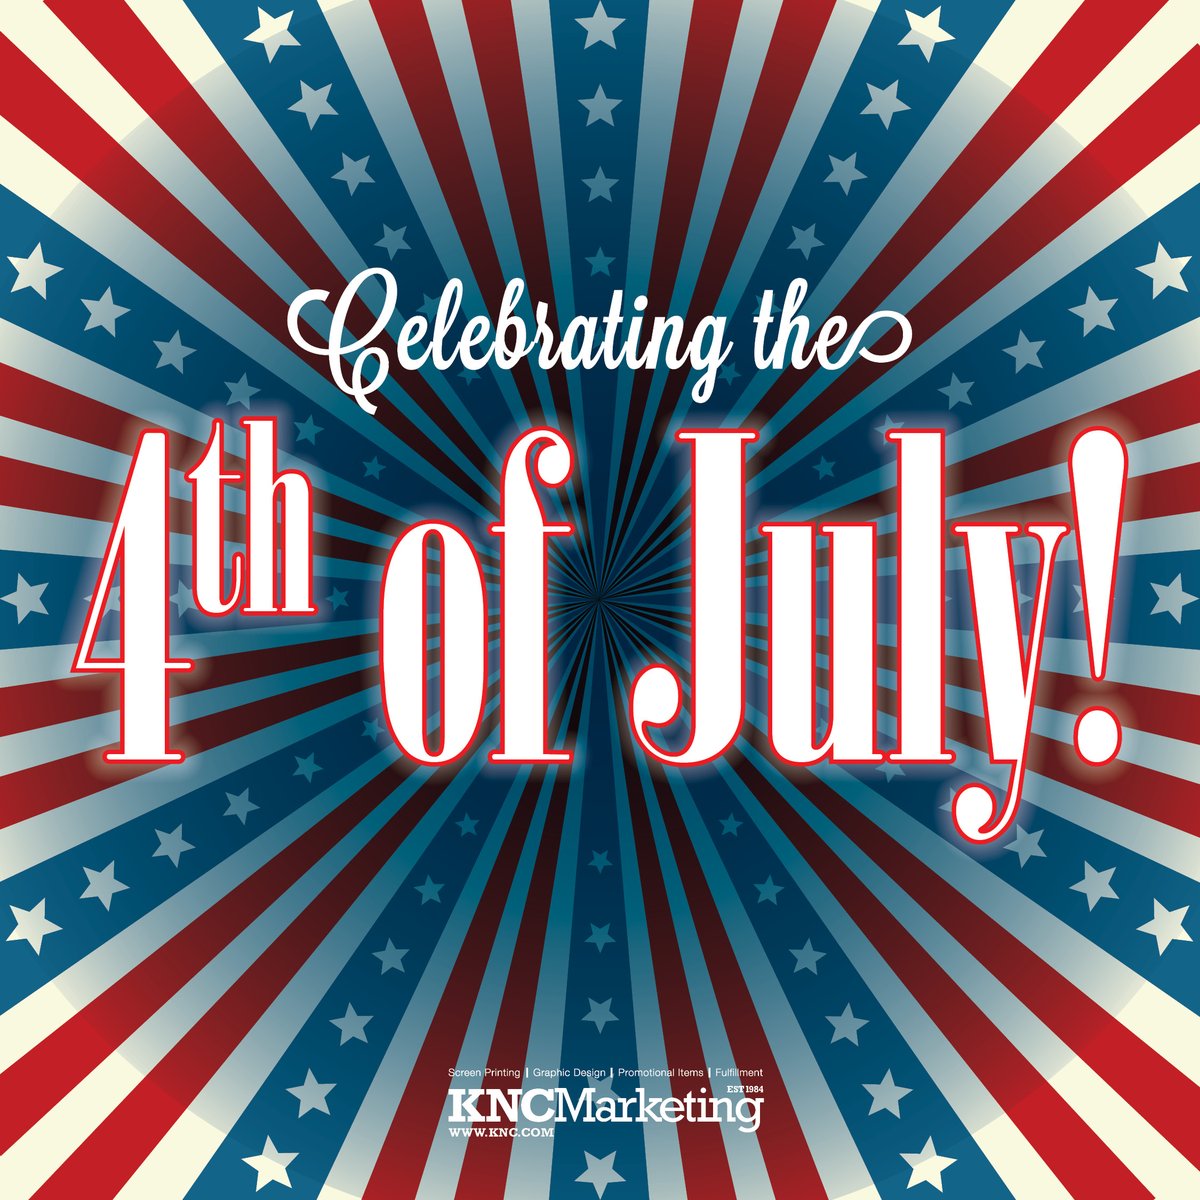 #HappyIndependence #redwhiteandblue #america #starsandstripesforever #patriotic #USA #IndependenceDay  #4thofJuly #4thofjuly2023 #fireworks #imprintedapparel #customapparel #screenprinting #KNC #fulfillment #graphicdesign #promtionalproducts #shoplocal #smallbusiness